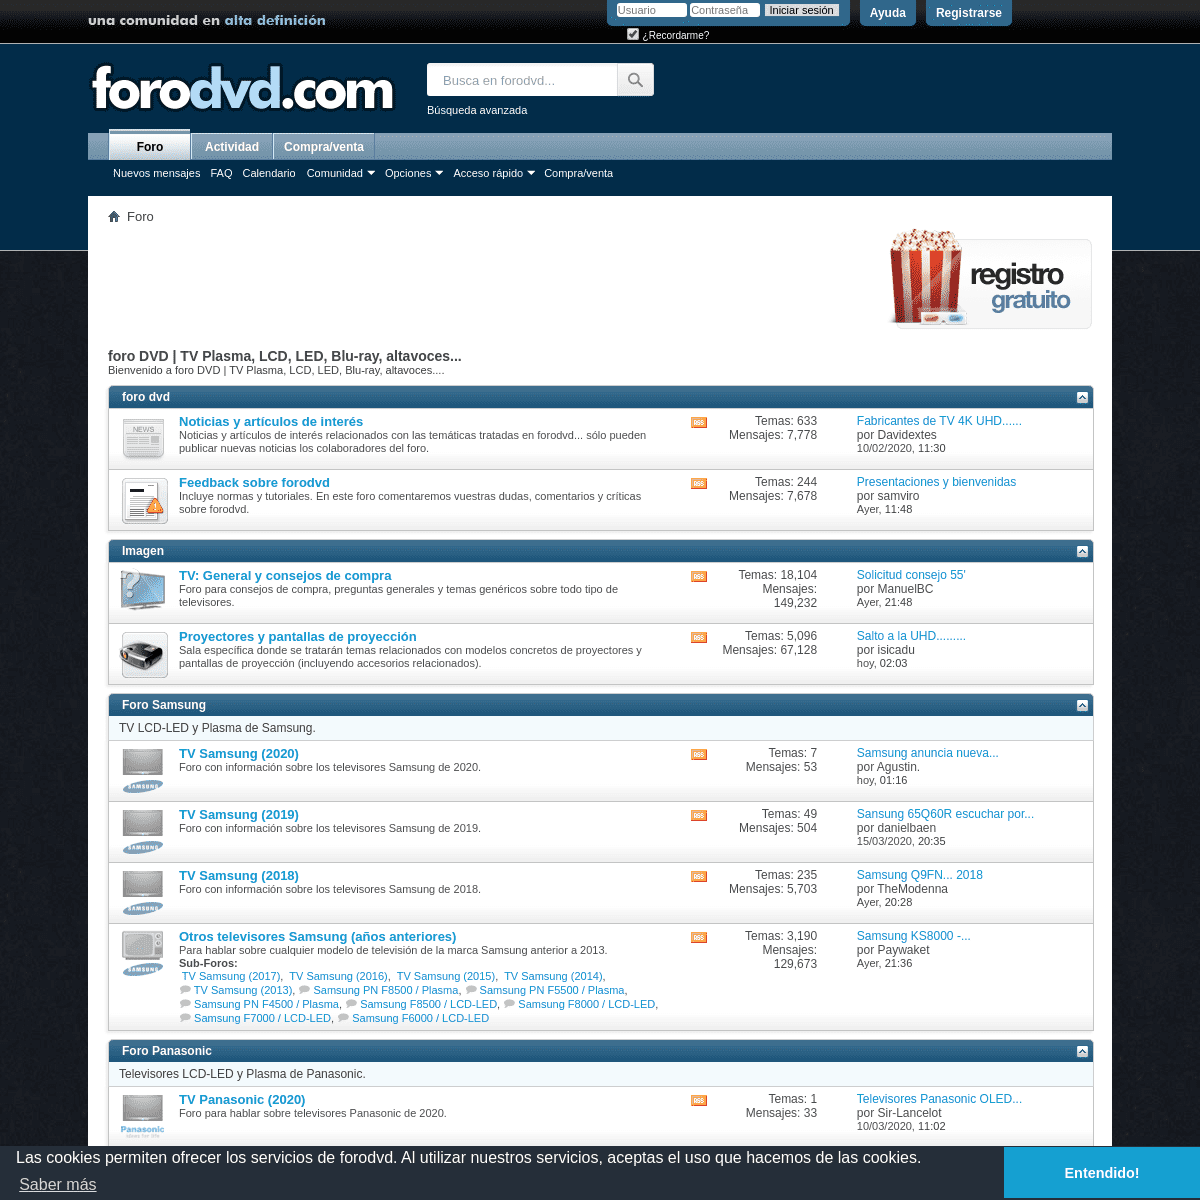 A complete backup of forodvd.com